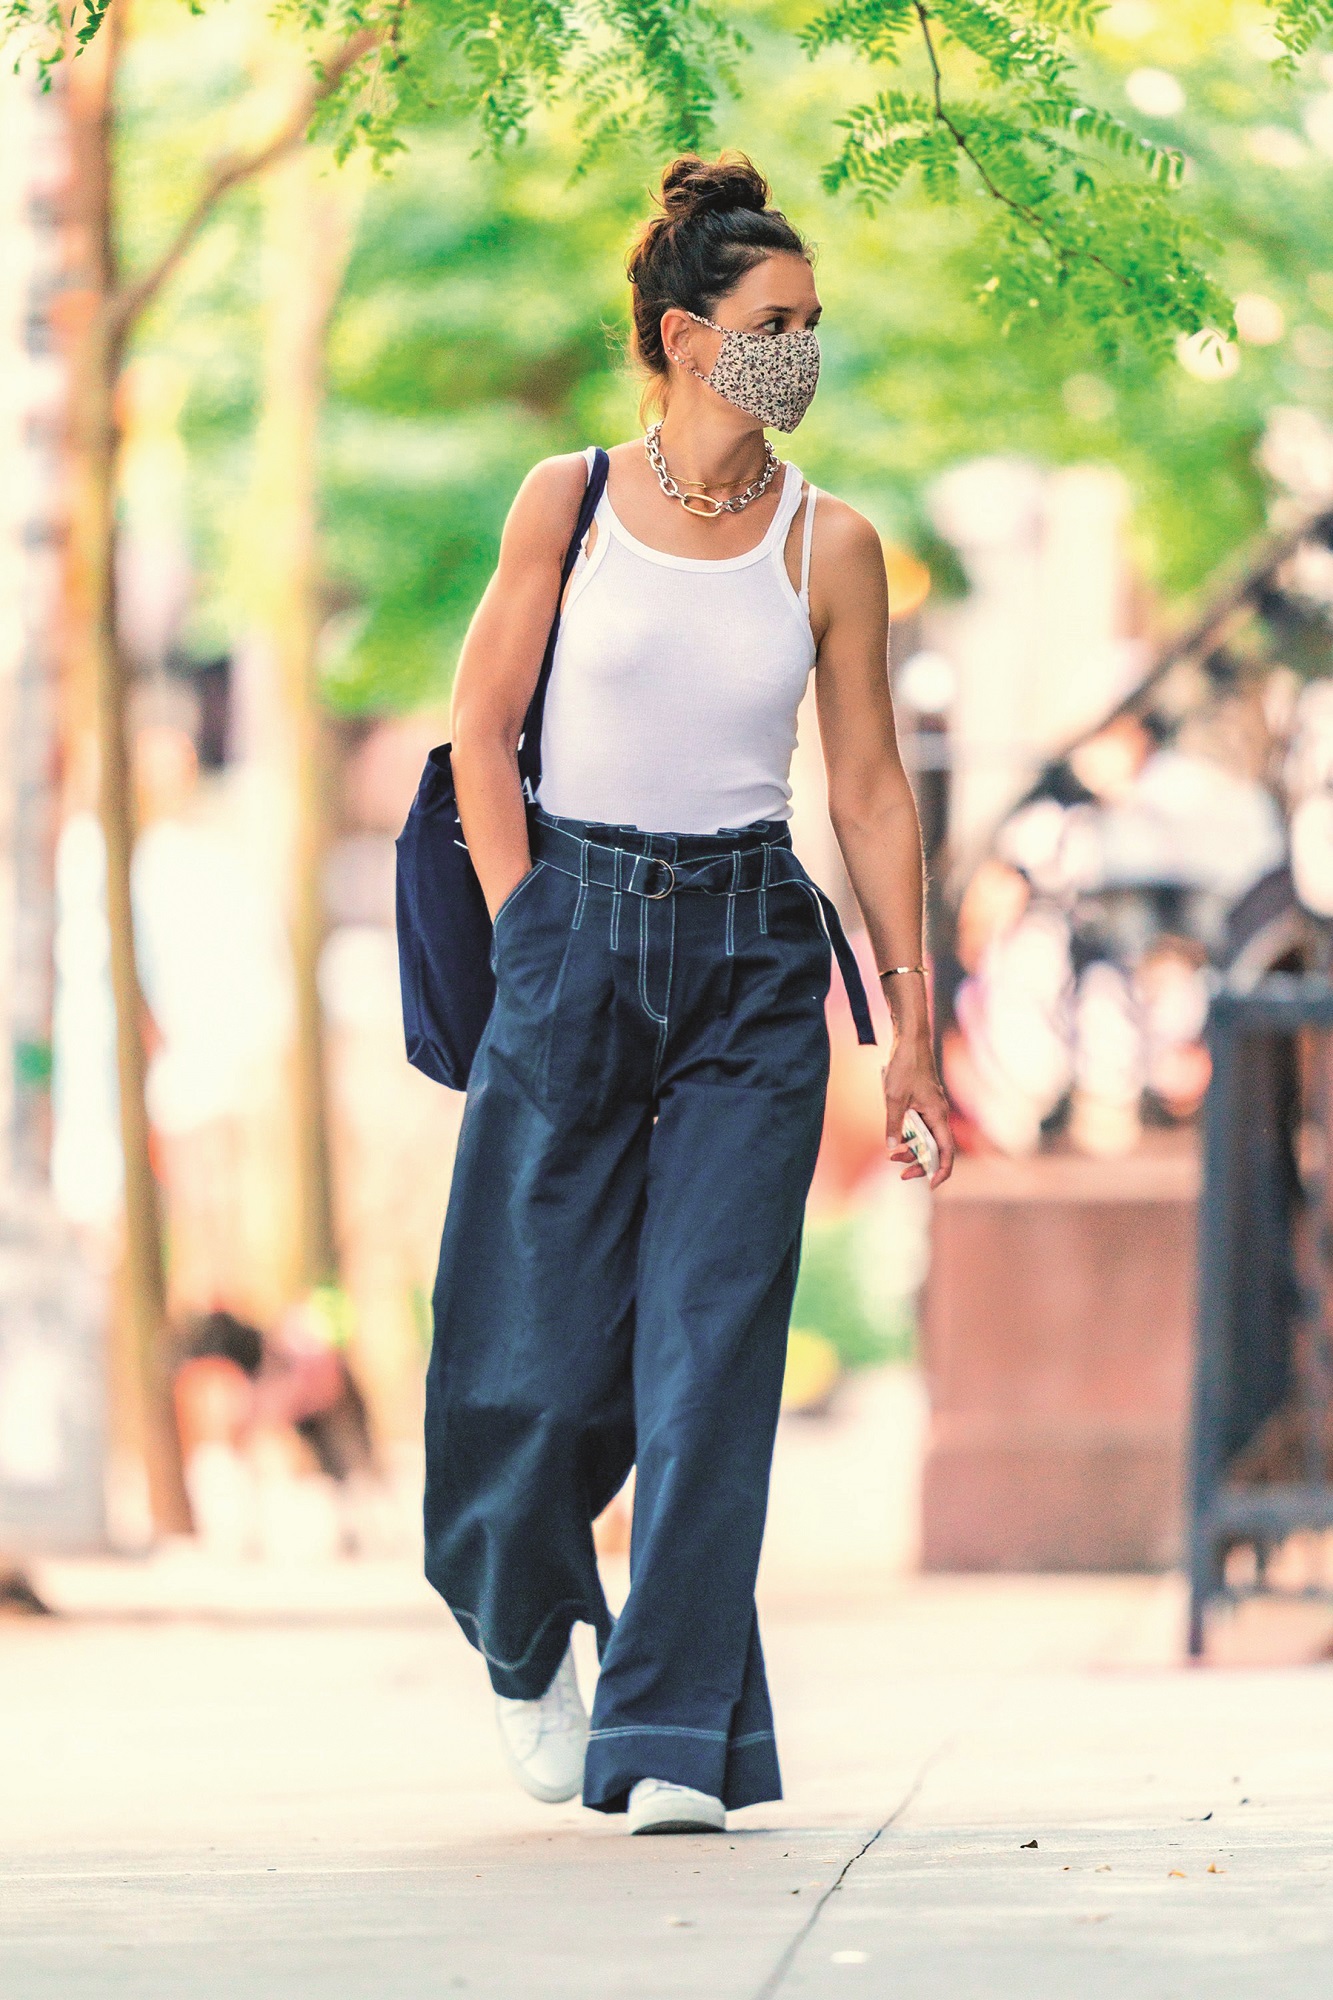 NEW YORK, NEW YORK - JULY 31: Katie Holmes is seen in SoHo on July 31, 2020 in New York City. (Photo by Gotham/GC Images)